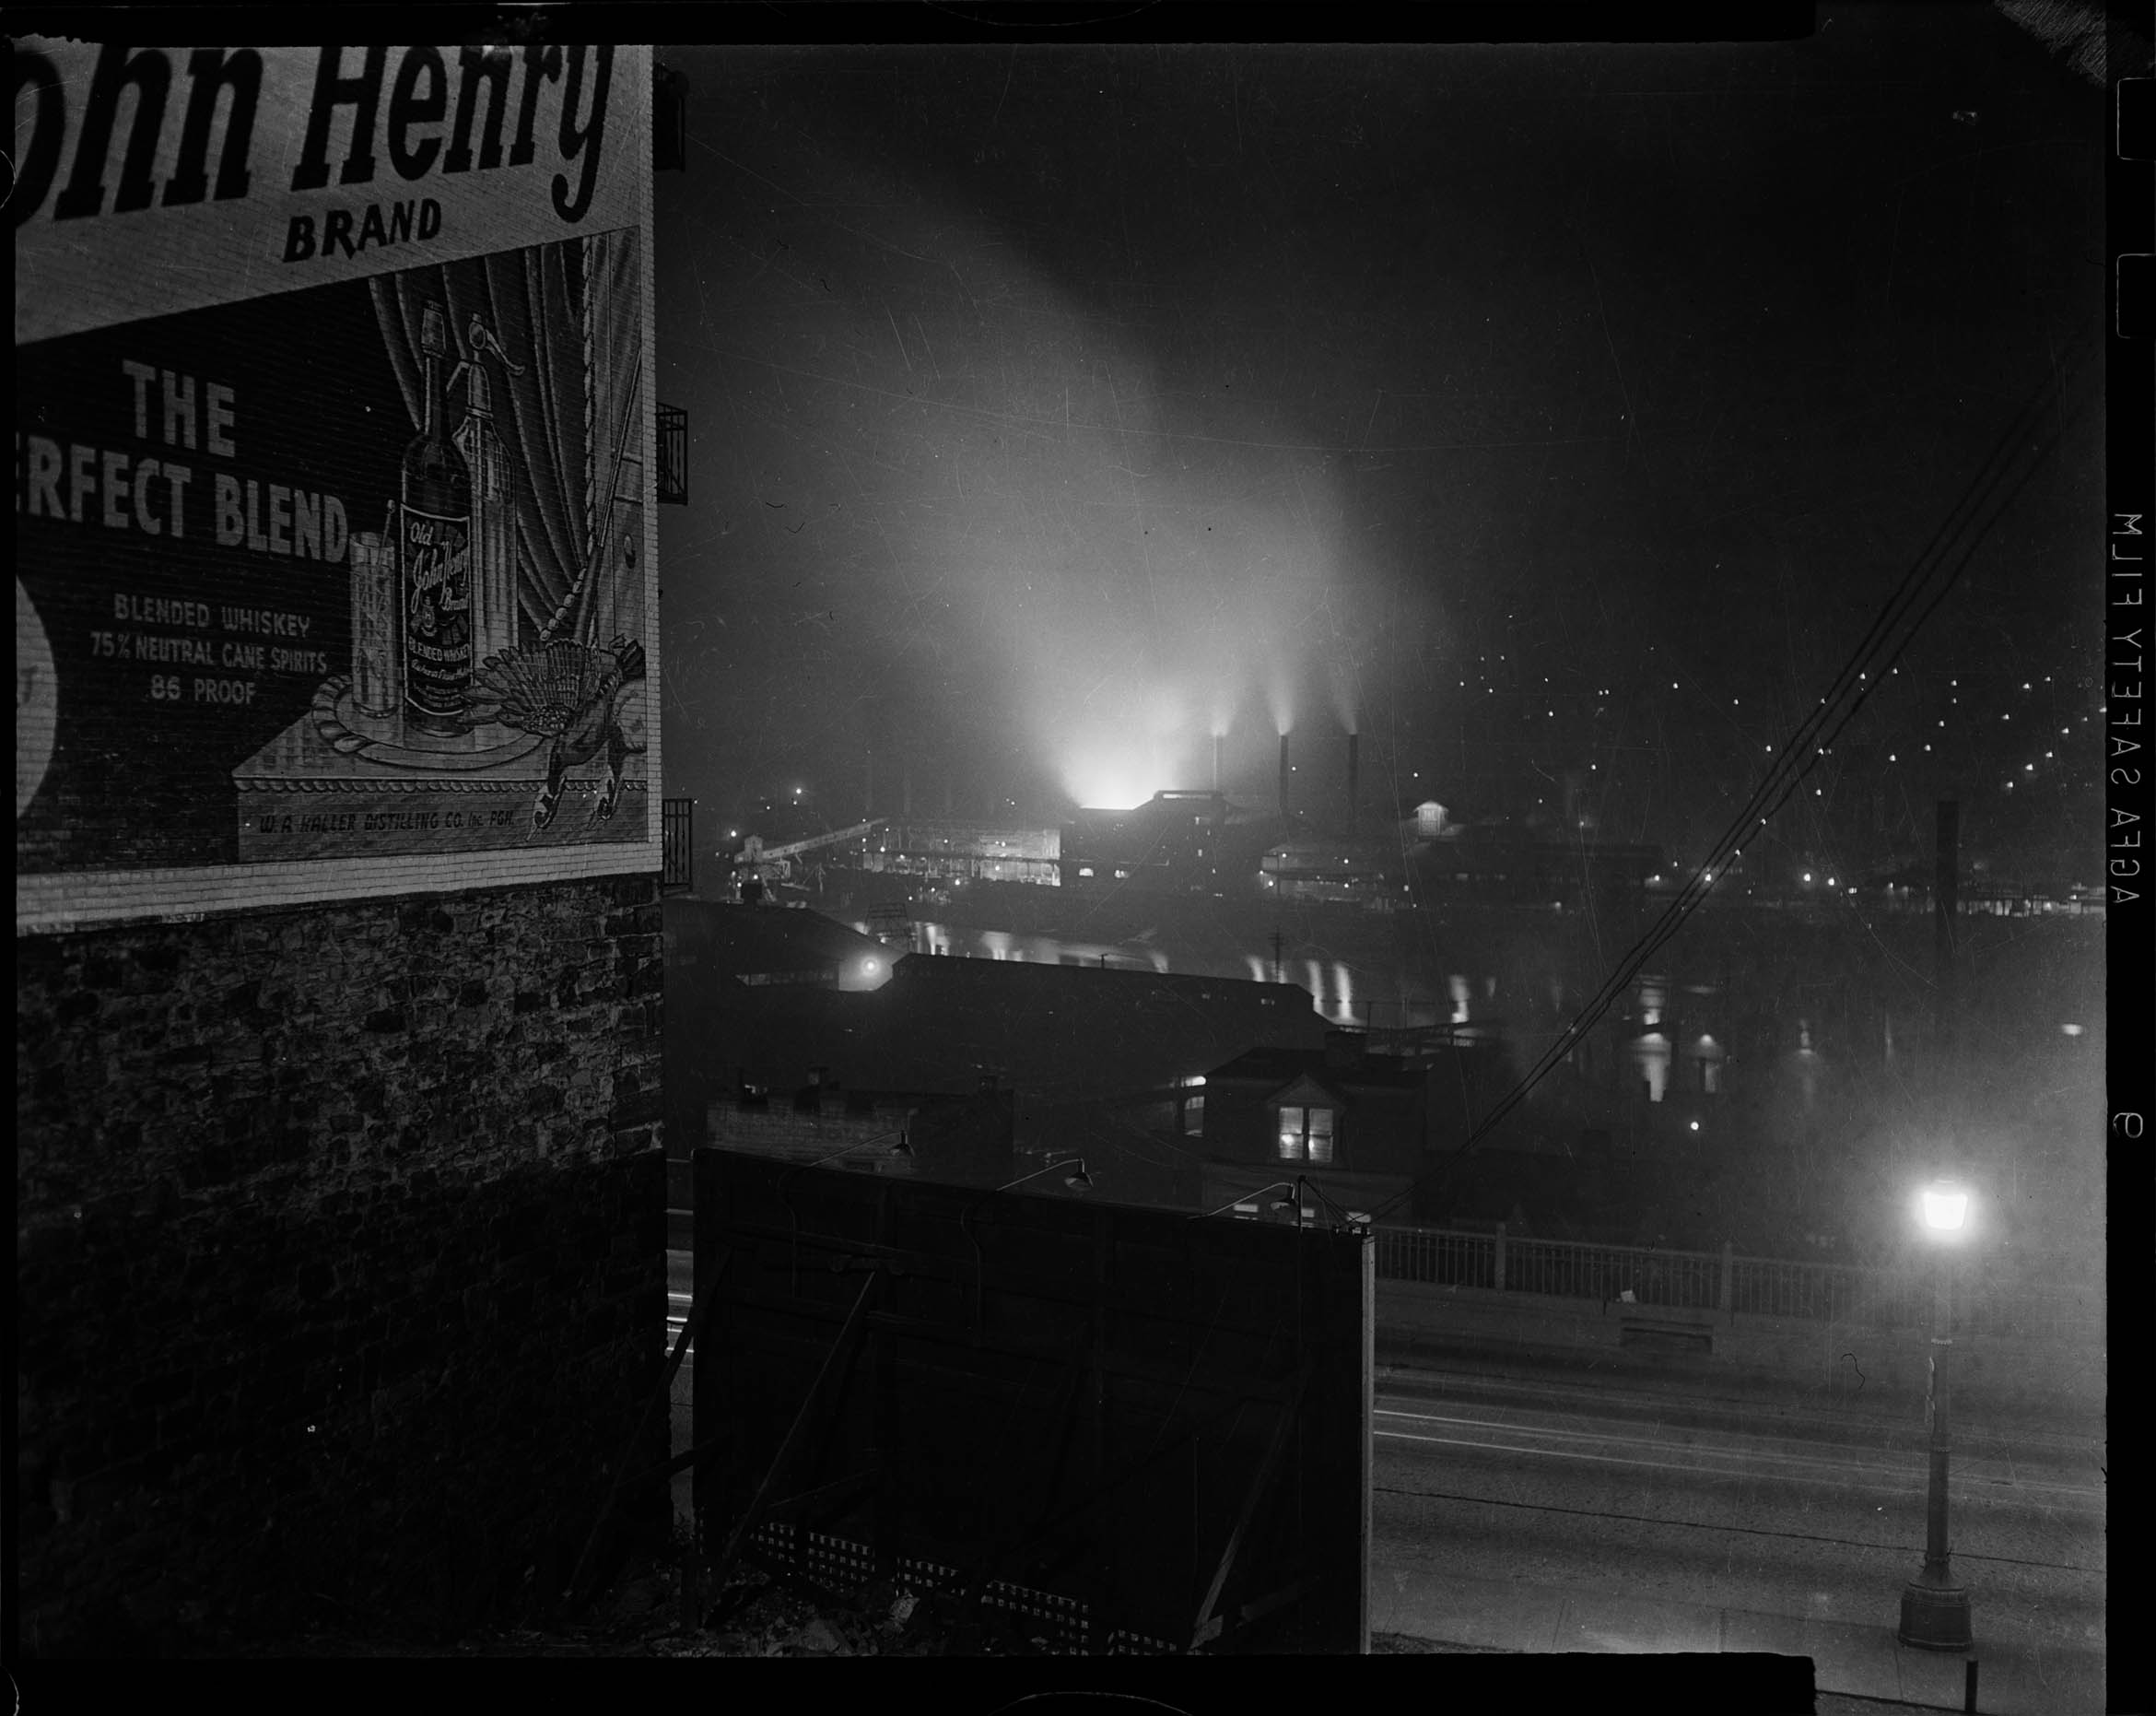 Night scene, with smokestacks of a factory in the background blasting out light and smoke. In the foreground on a building at left, a large wall mural shows a whiskey advertisement. It reads "John Henry Brand. The perfect blend."